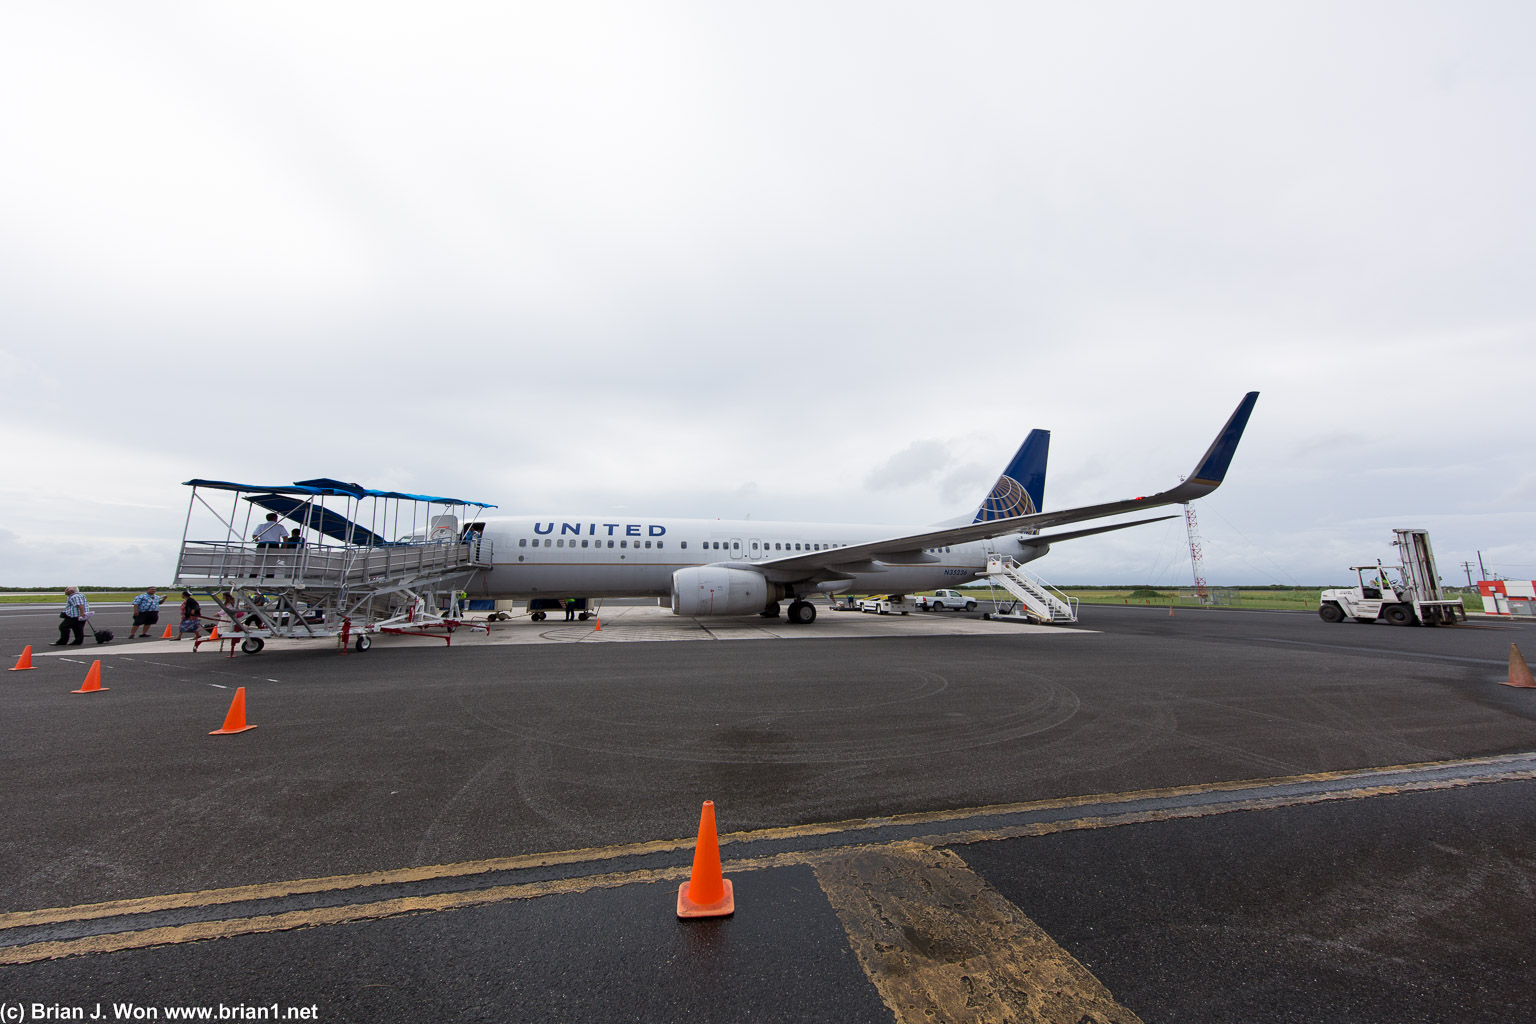 United gets a lot of mileage out of these 737-800 WL's.